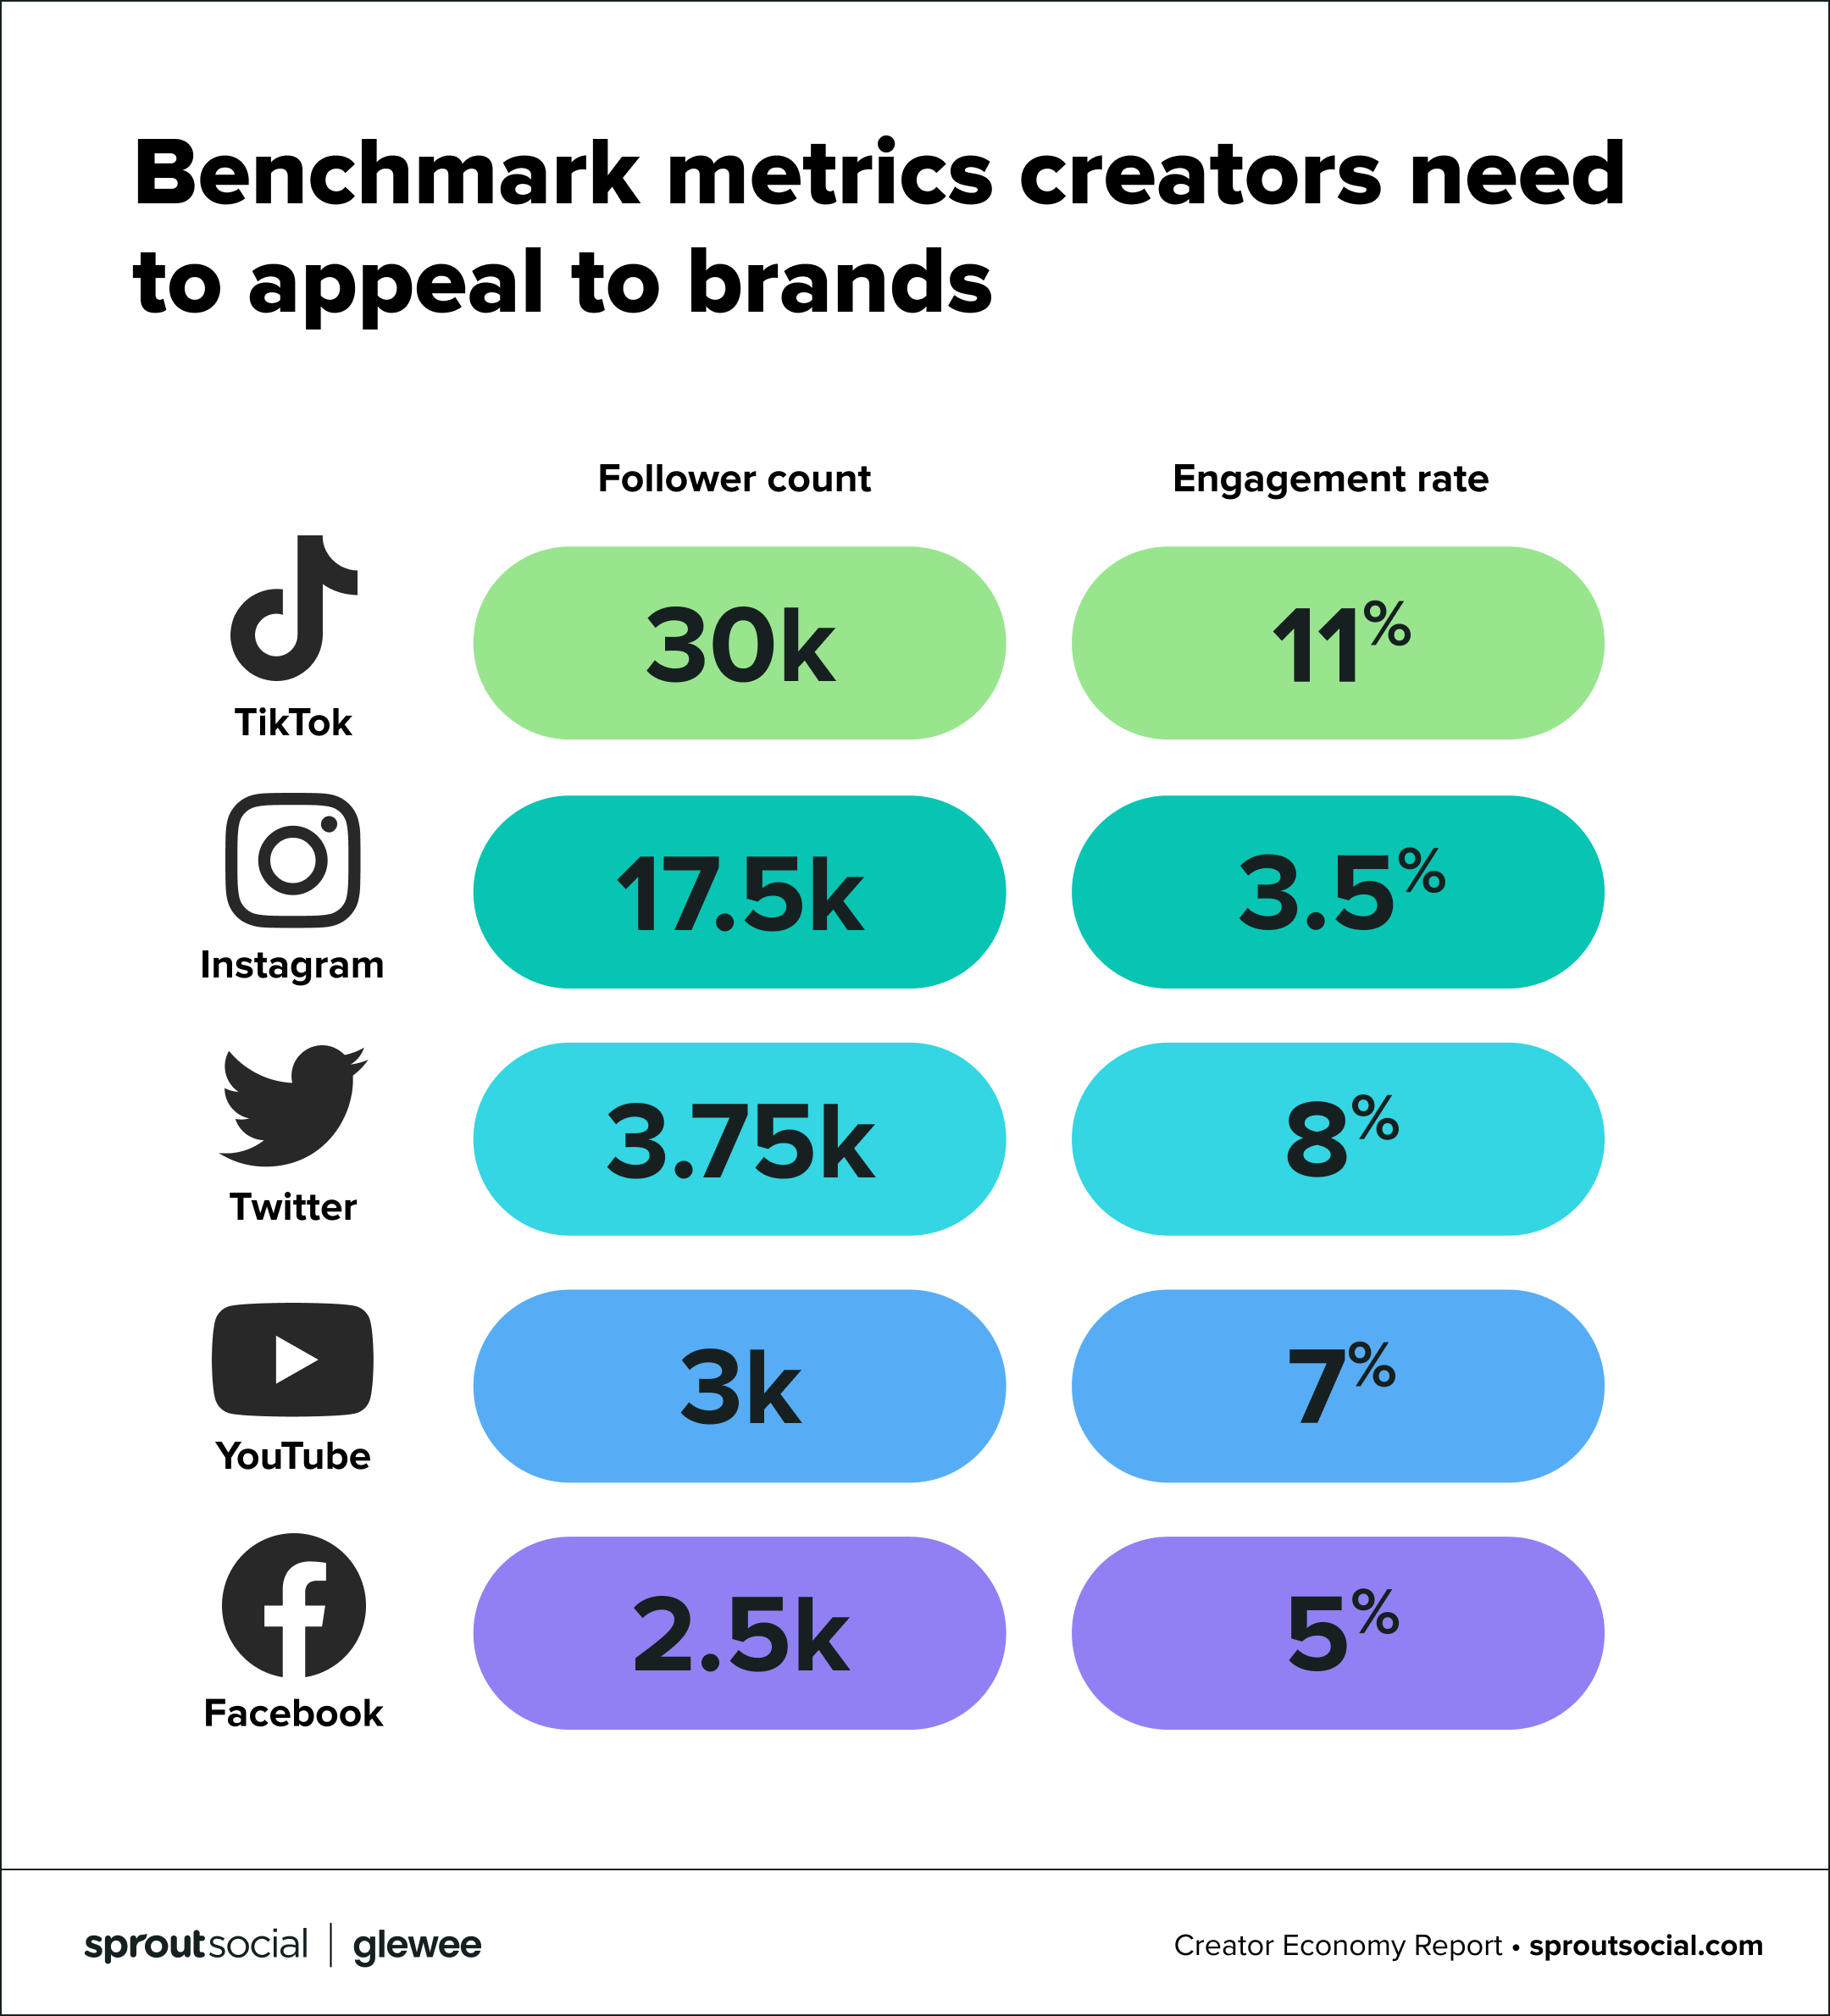 Graph of the benchmark follower count and engagement rate metrics creators need to appeal to brands